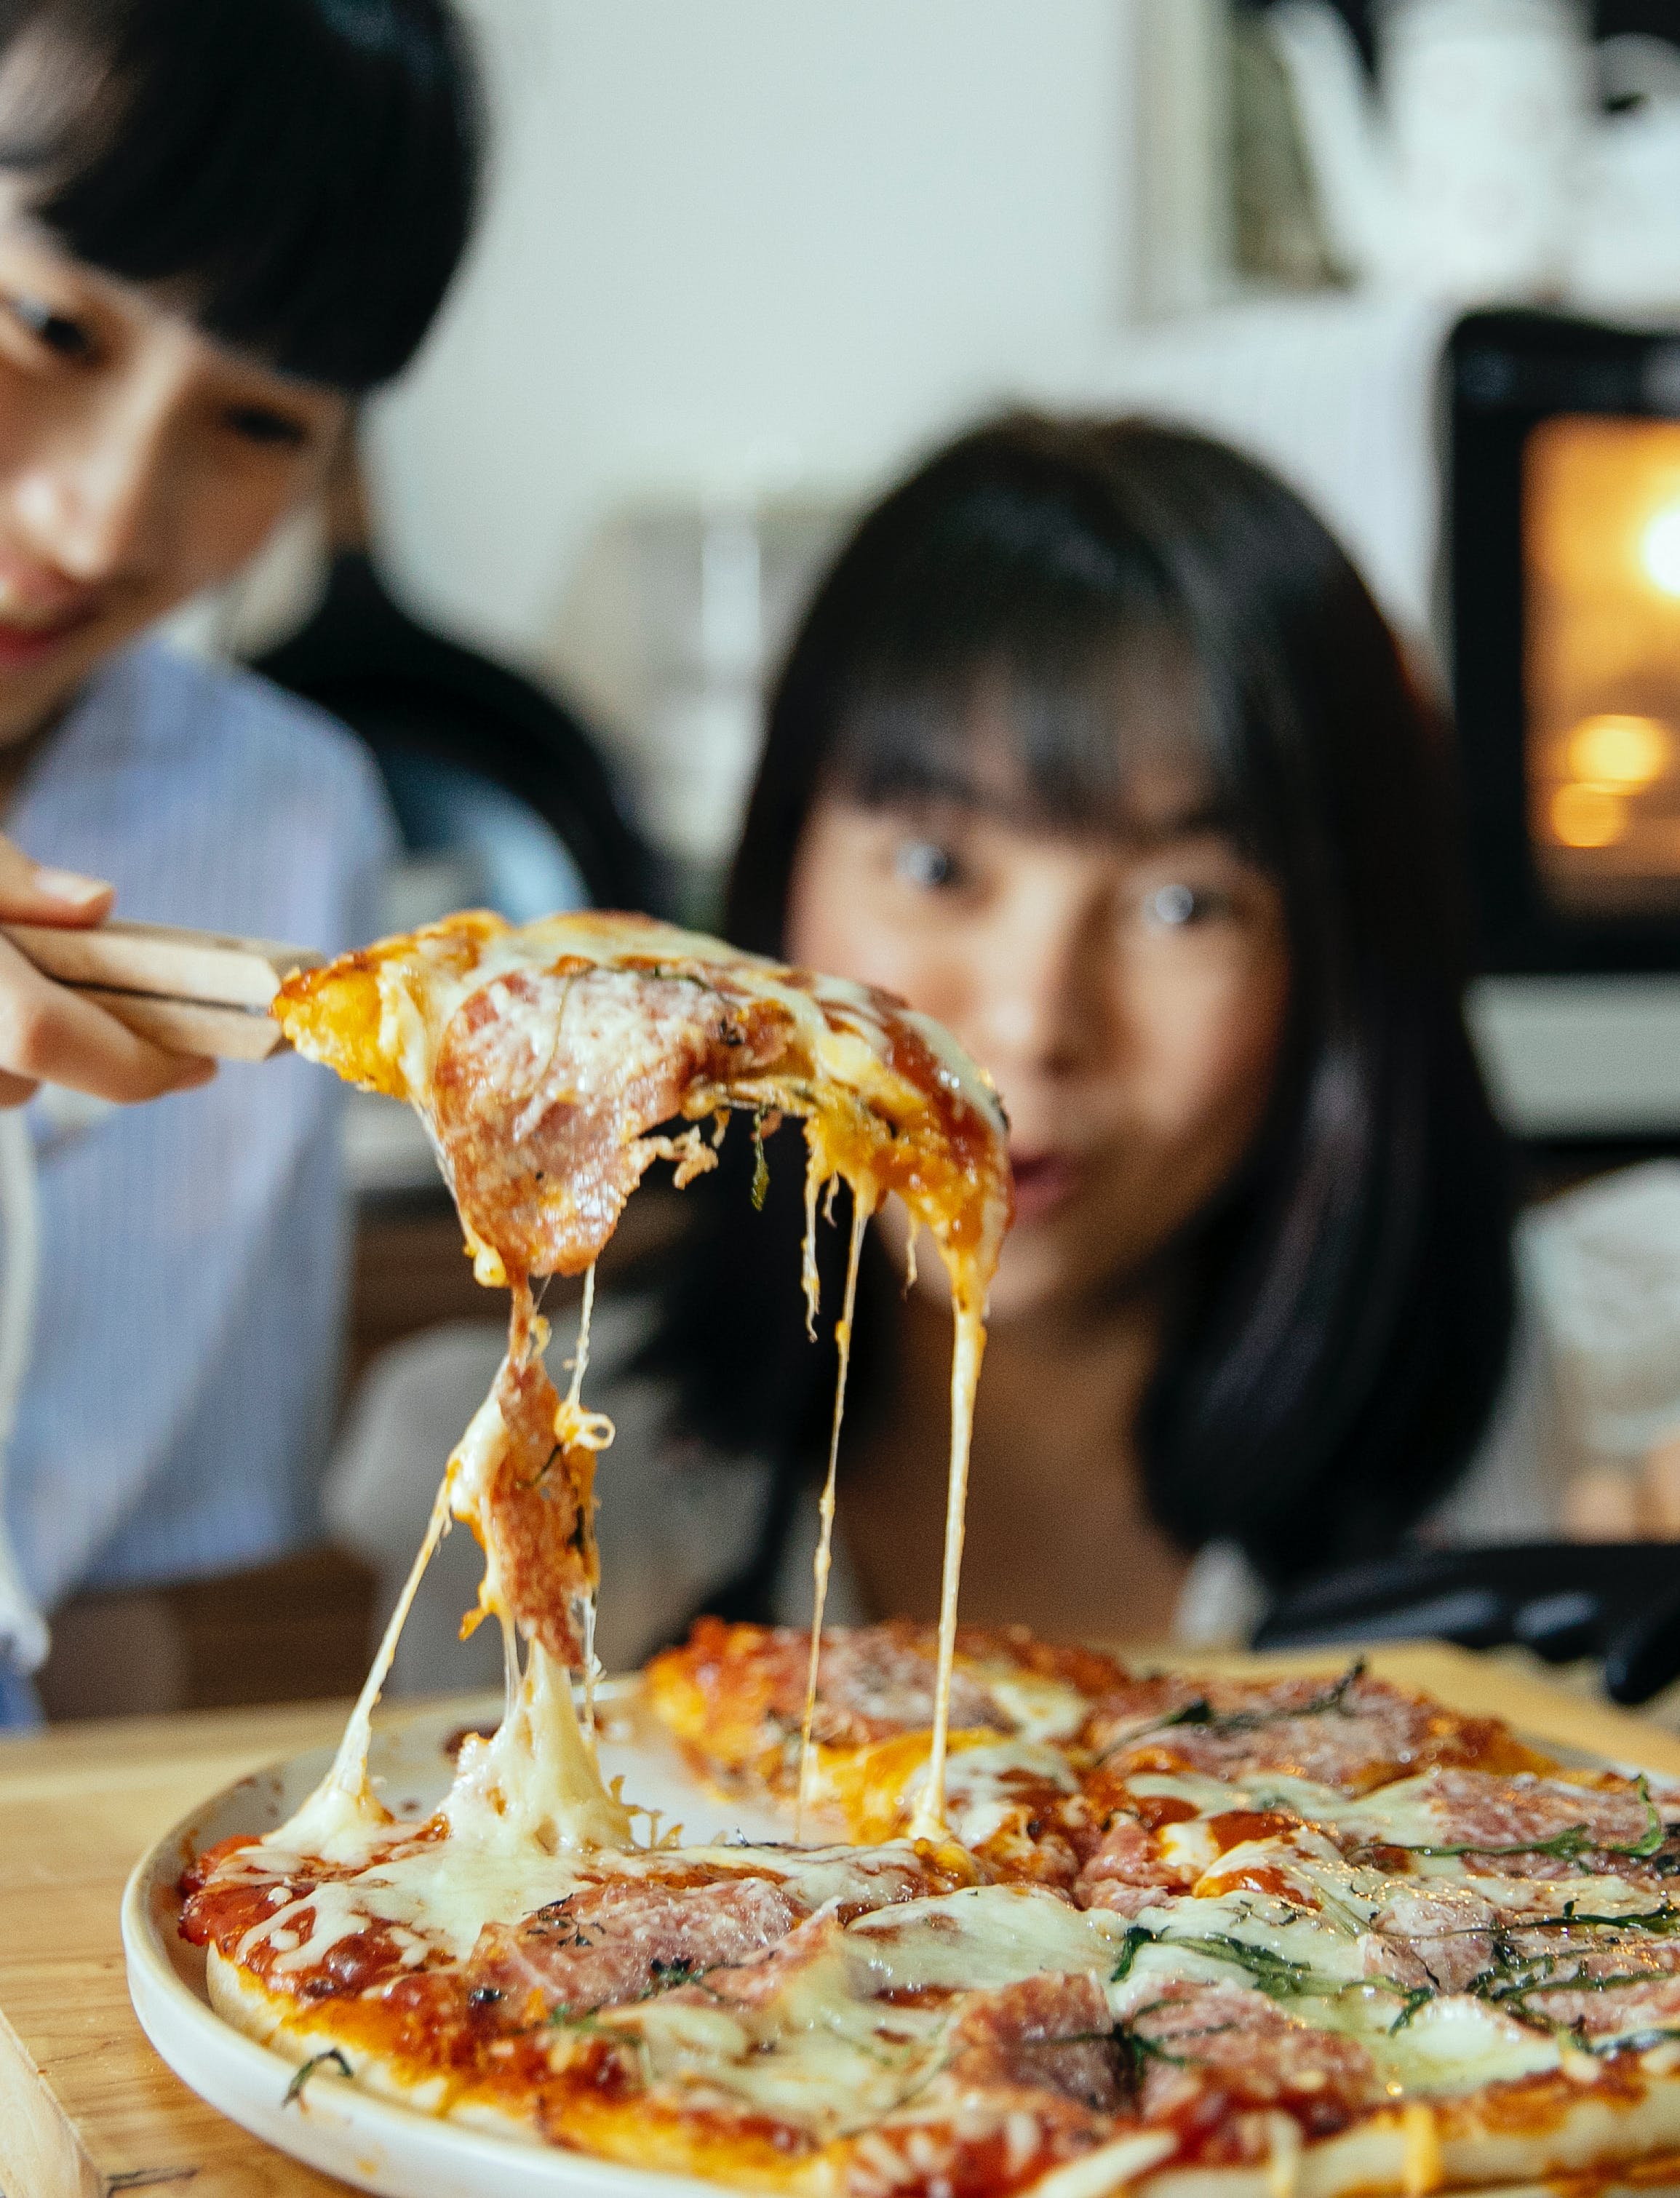 A woman eyes a slice of pizza | Source: Pexels